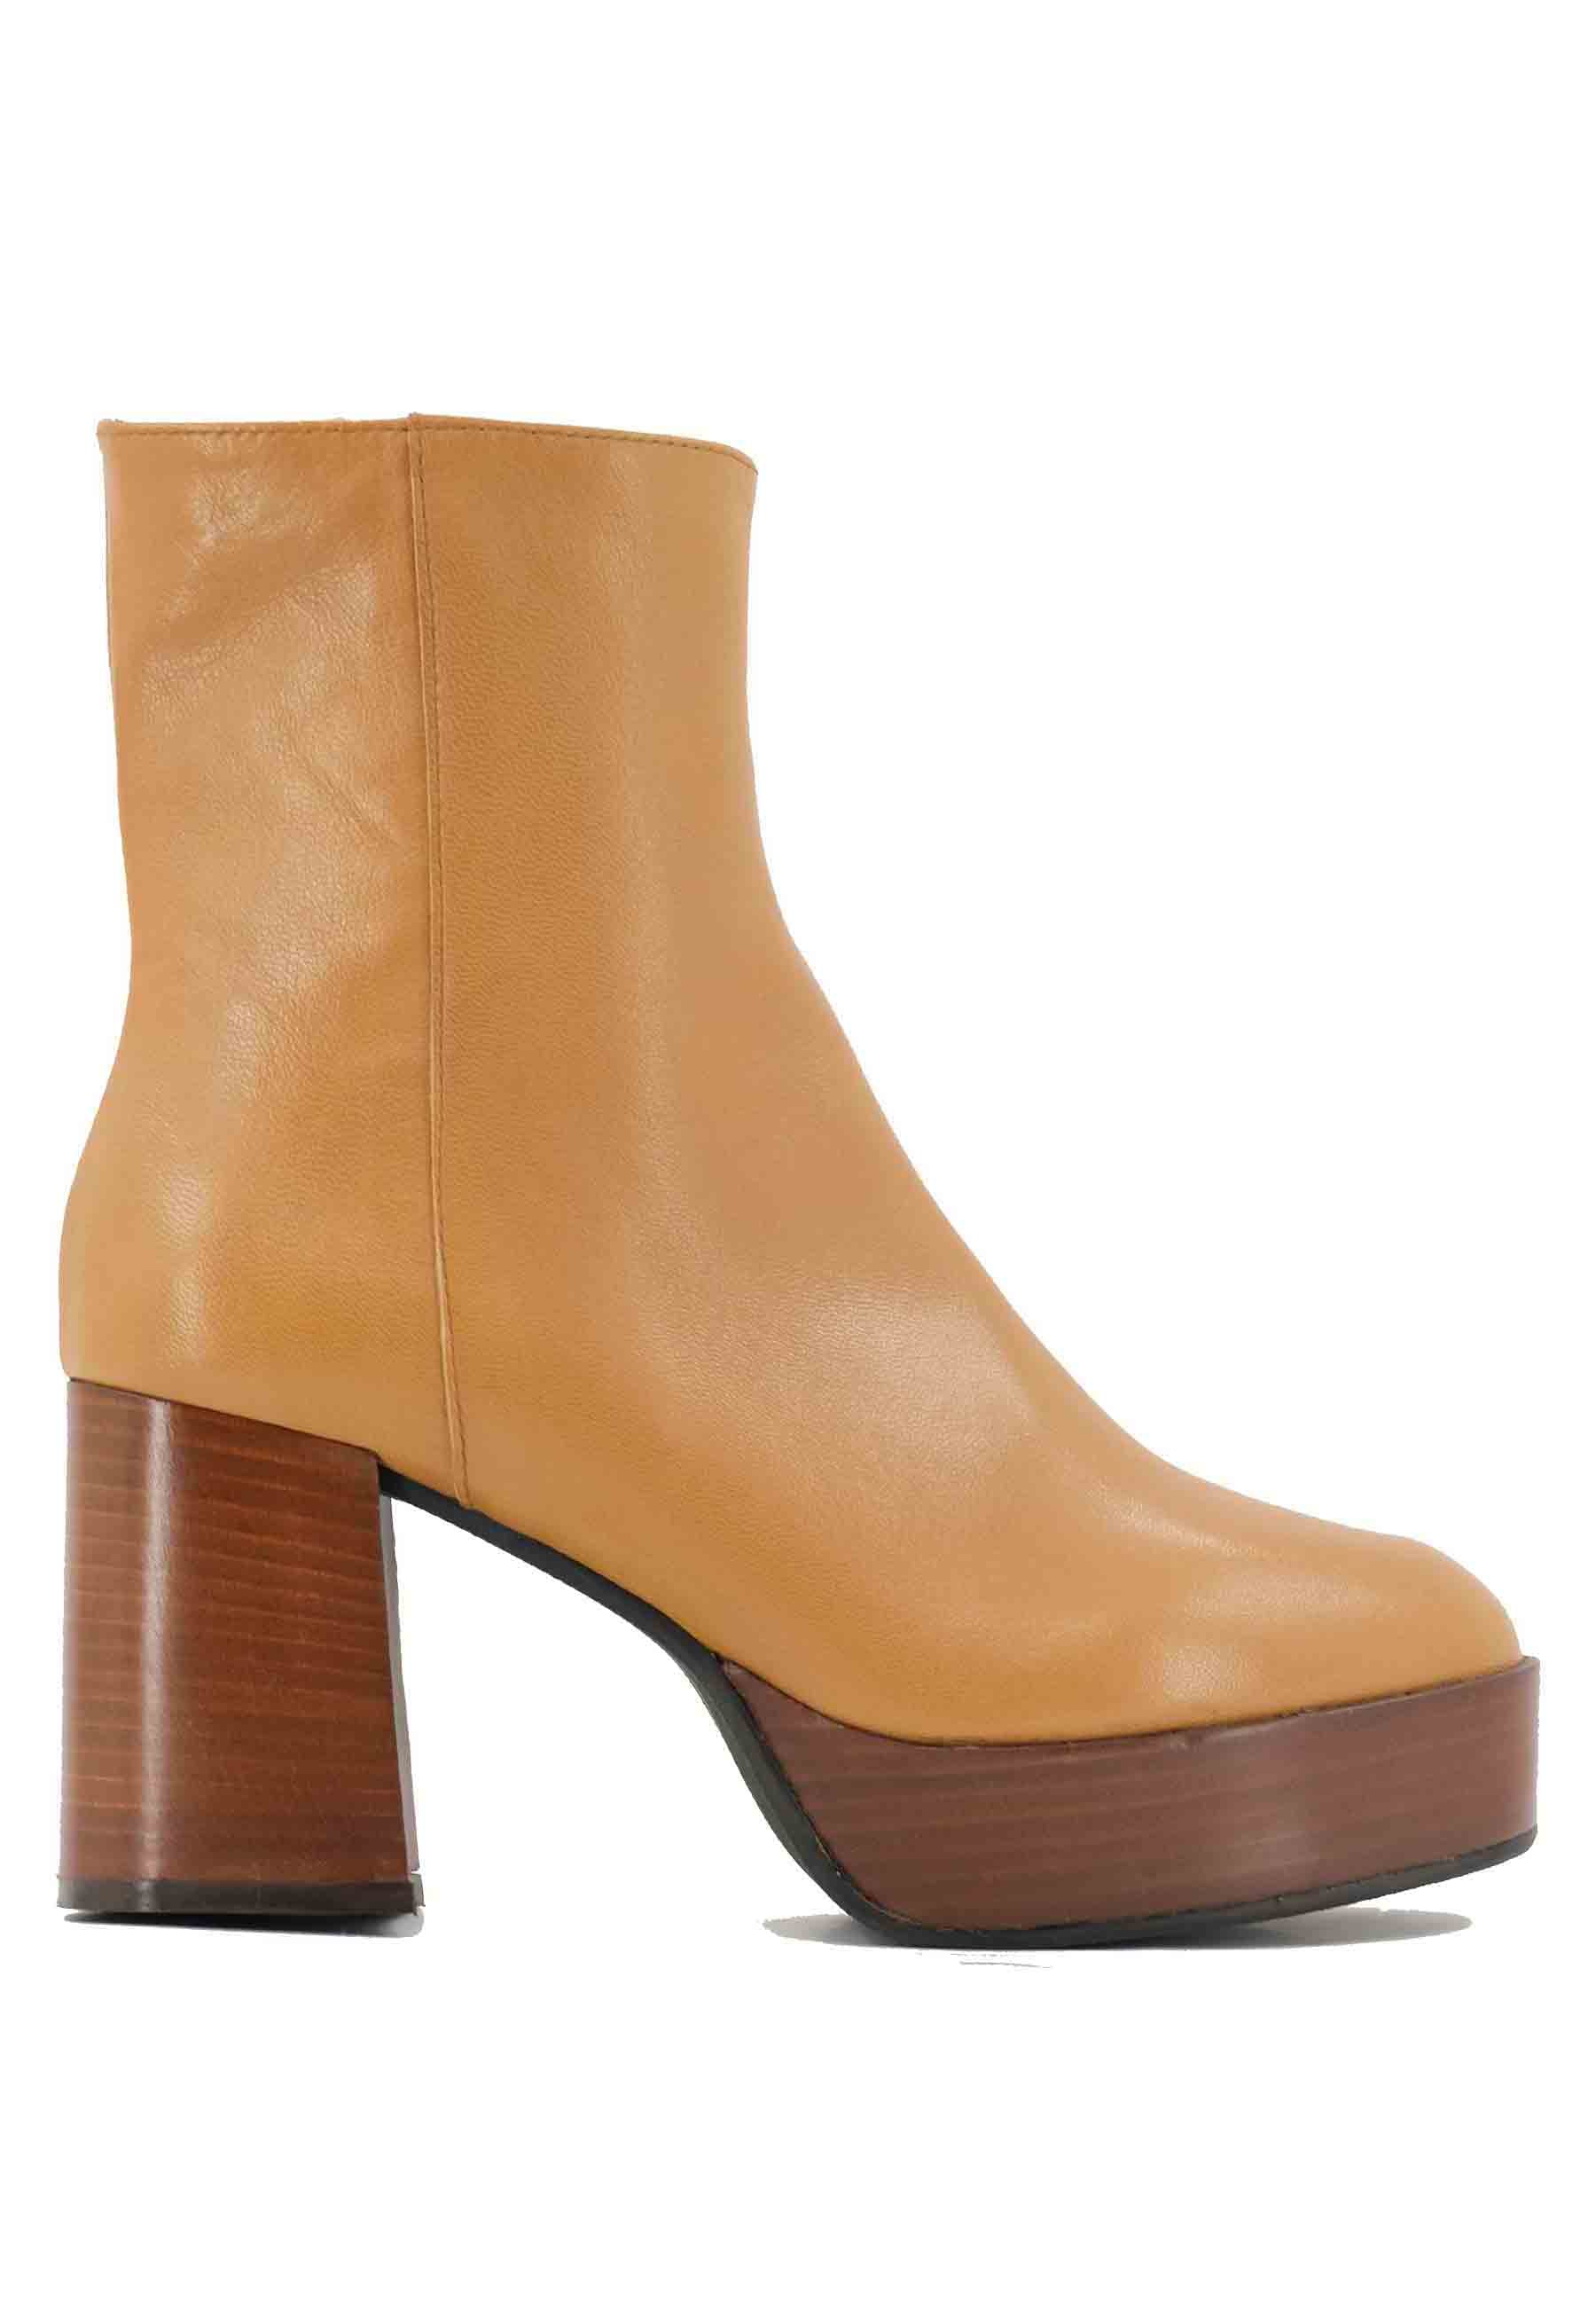 TR1556 mustard leather ankle boots with high heel and platform with side zip closure